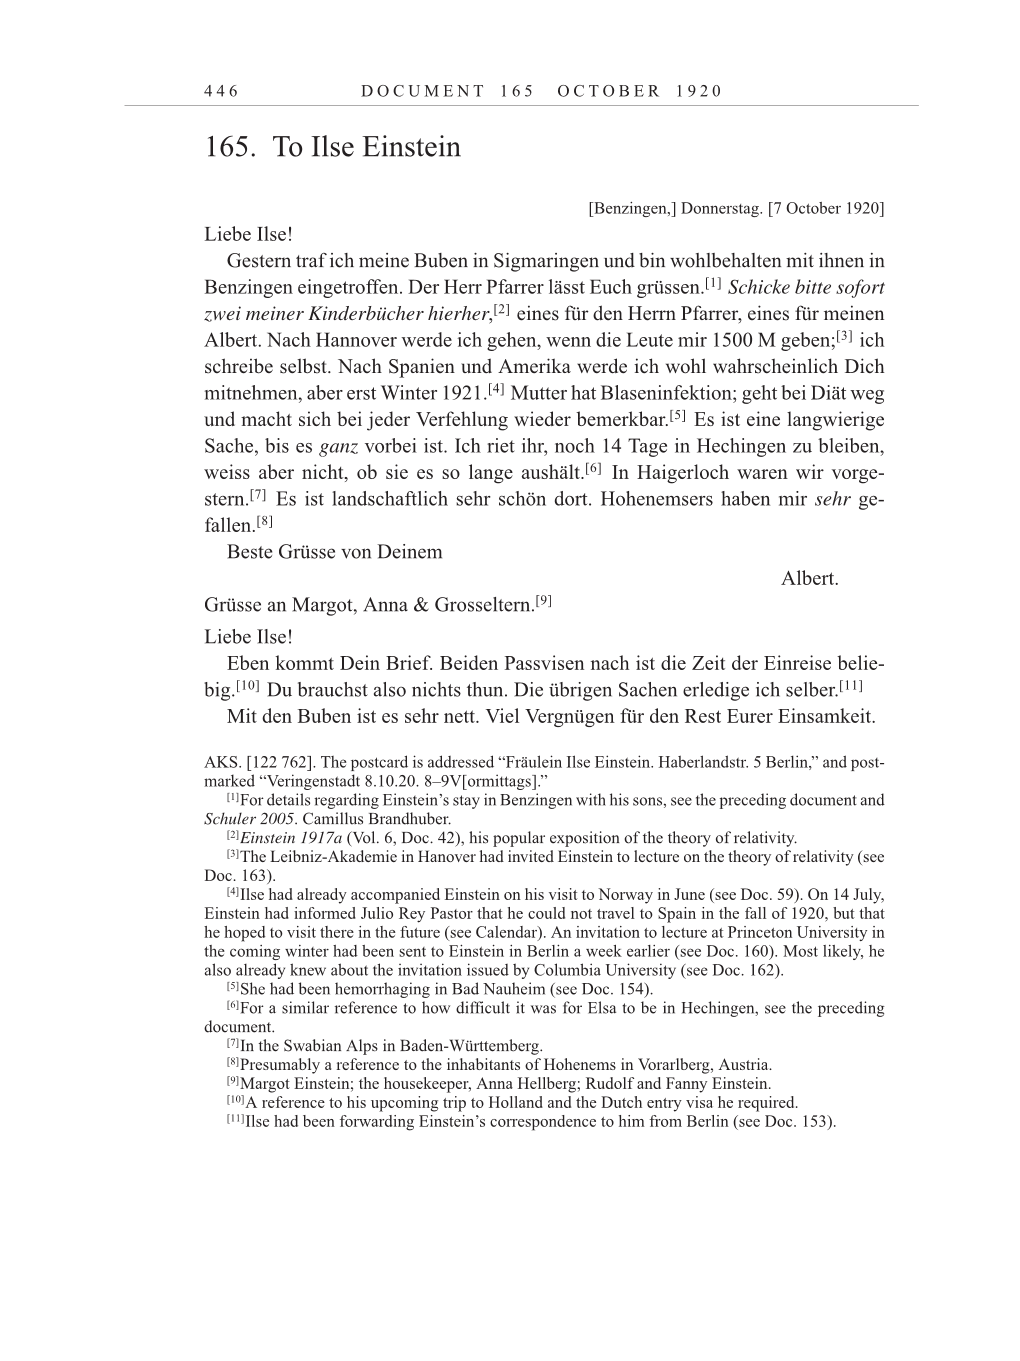 Volume 10: The Berlin Years: Correspondence May-December 1920 / Supplementary Correspondence 1909-1920 page 446